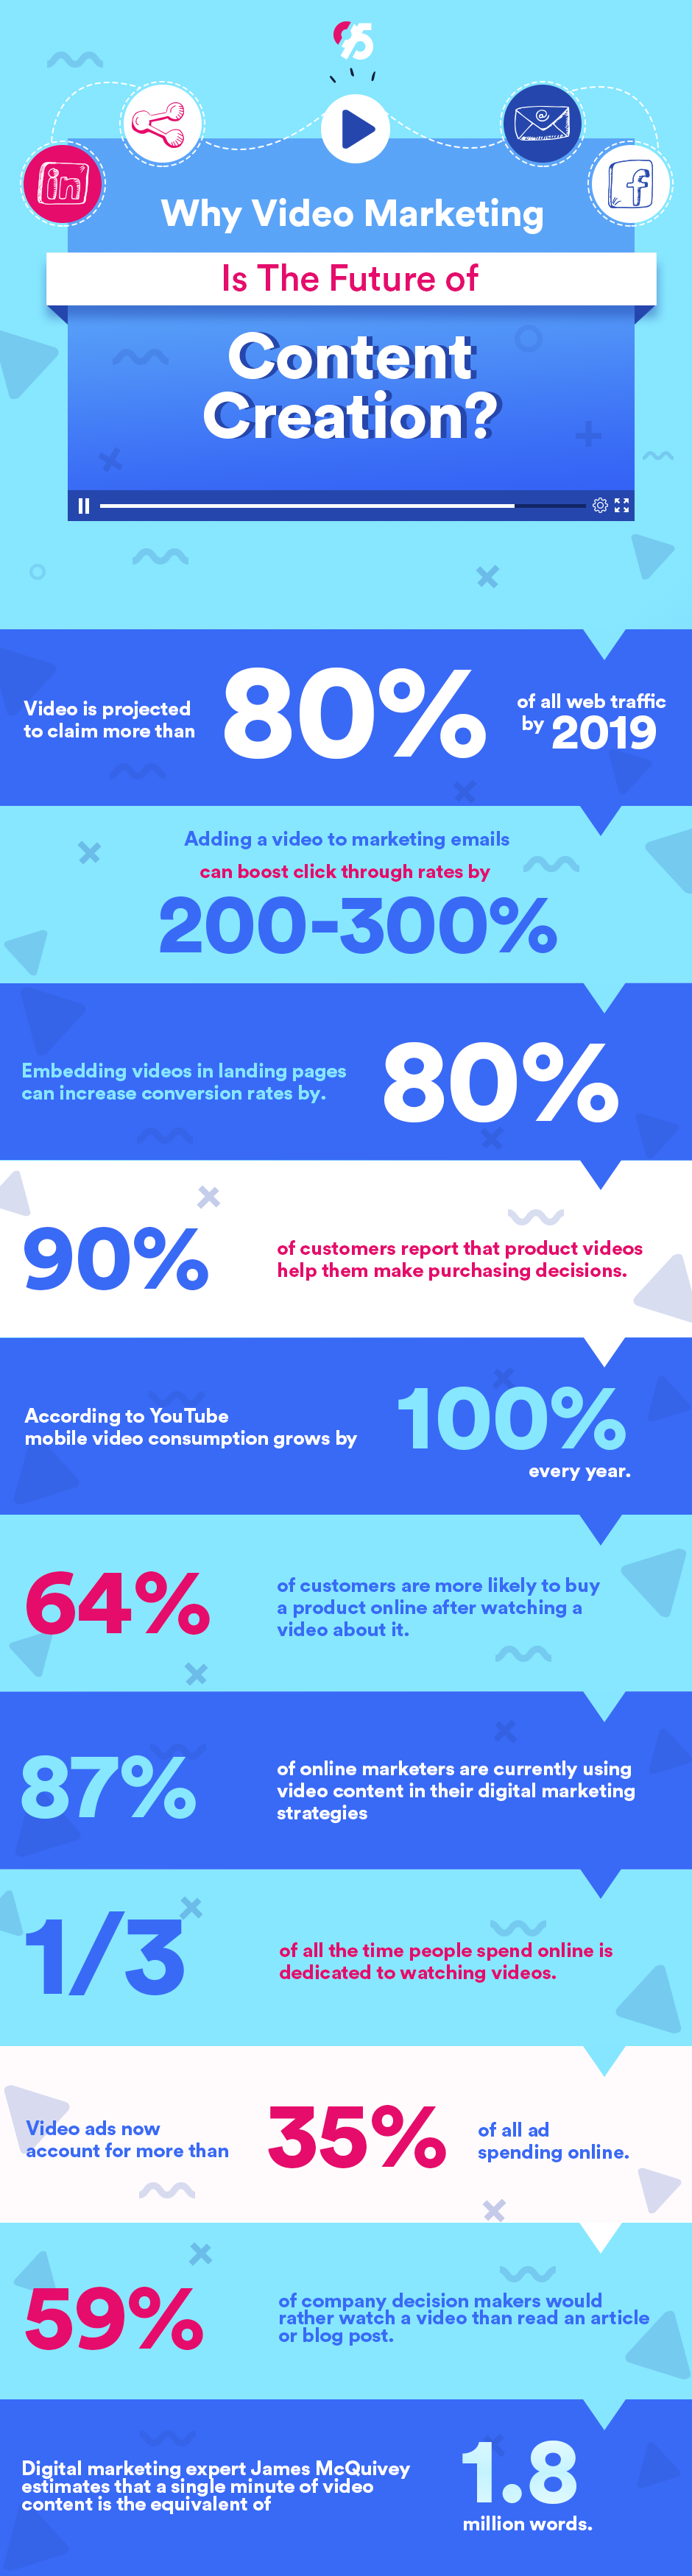 Why Video Marketing Is The Future of Content Creation? - #Infographic